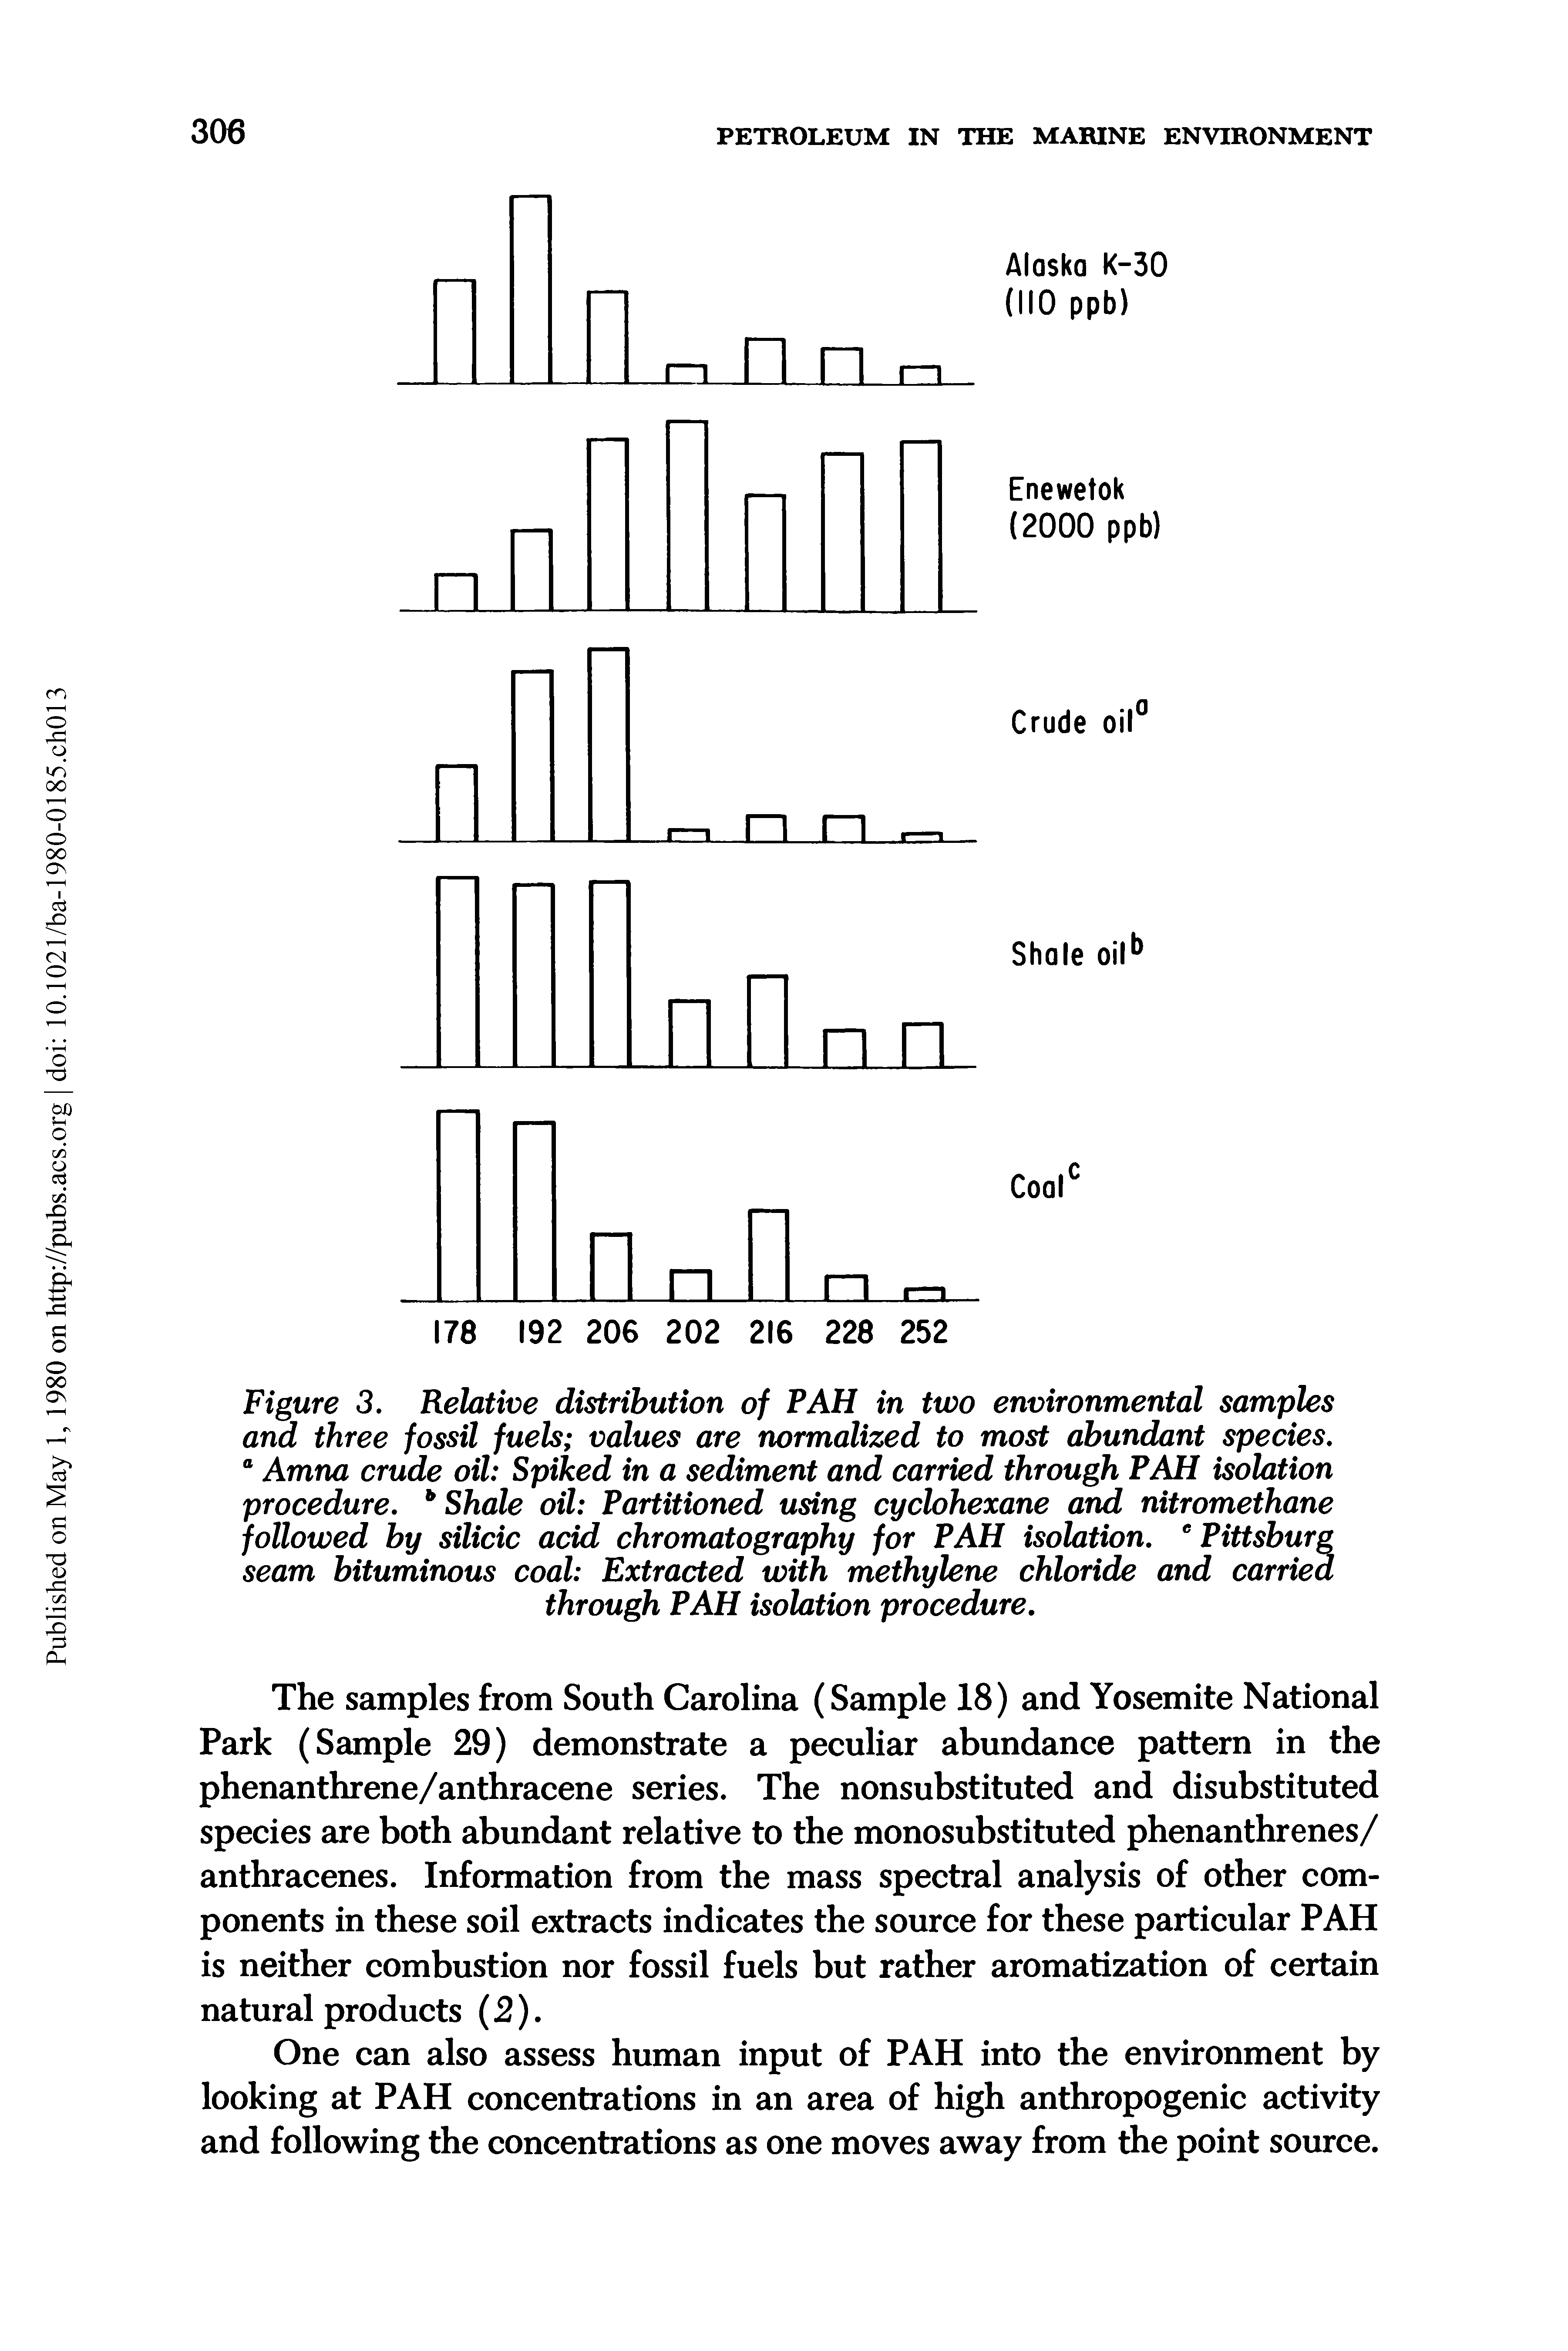 Figure 3. Relative distribution of PAH in two environmental samples ana three fossil fuels values are normalized to most abundant species. ° Amna crude oil Spiked in a sediment and carried through PAH isolation procedure. b Shale oil Partitioned using cyclohexane and nitromethane followed by silicic acid chromatography for PAH isolation. e Pittsburg seam bituminous coal Extracted with methylene chloride and carried through PAH isolation procedure.